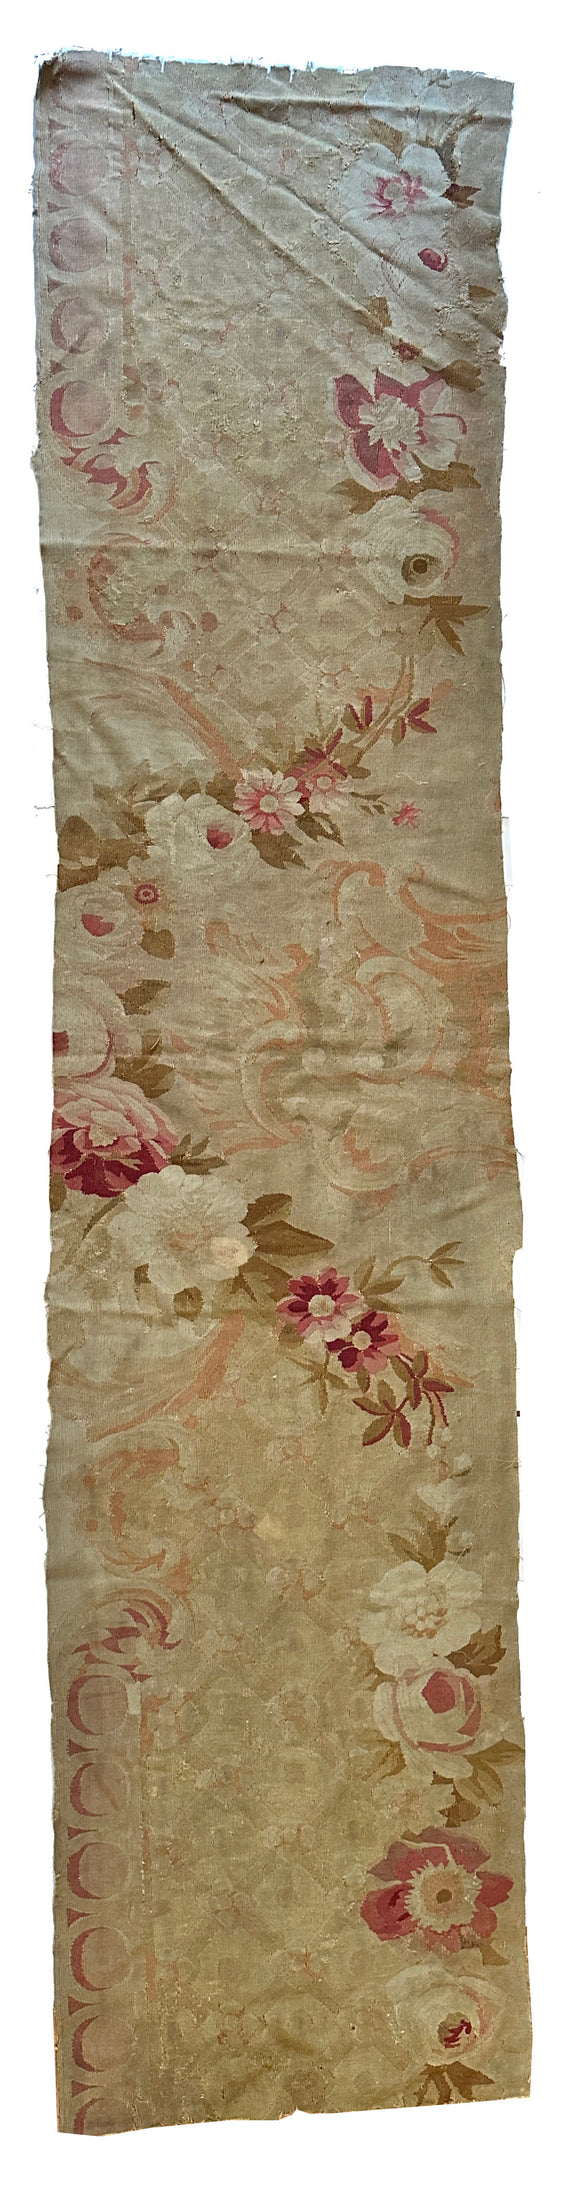 19th Century Aubusson Floral Runner Remnant for Pillows